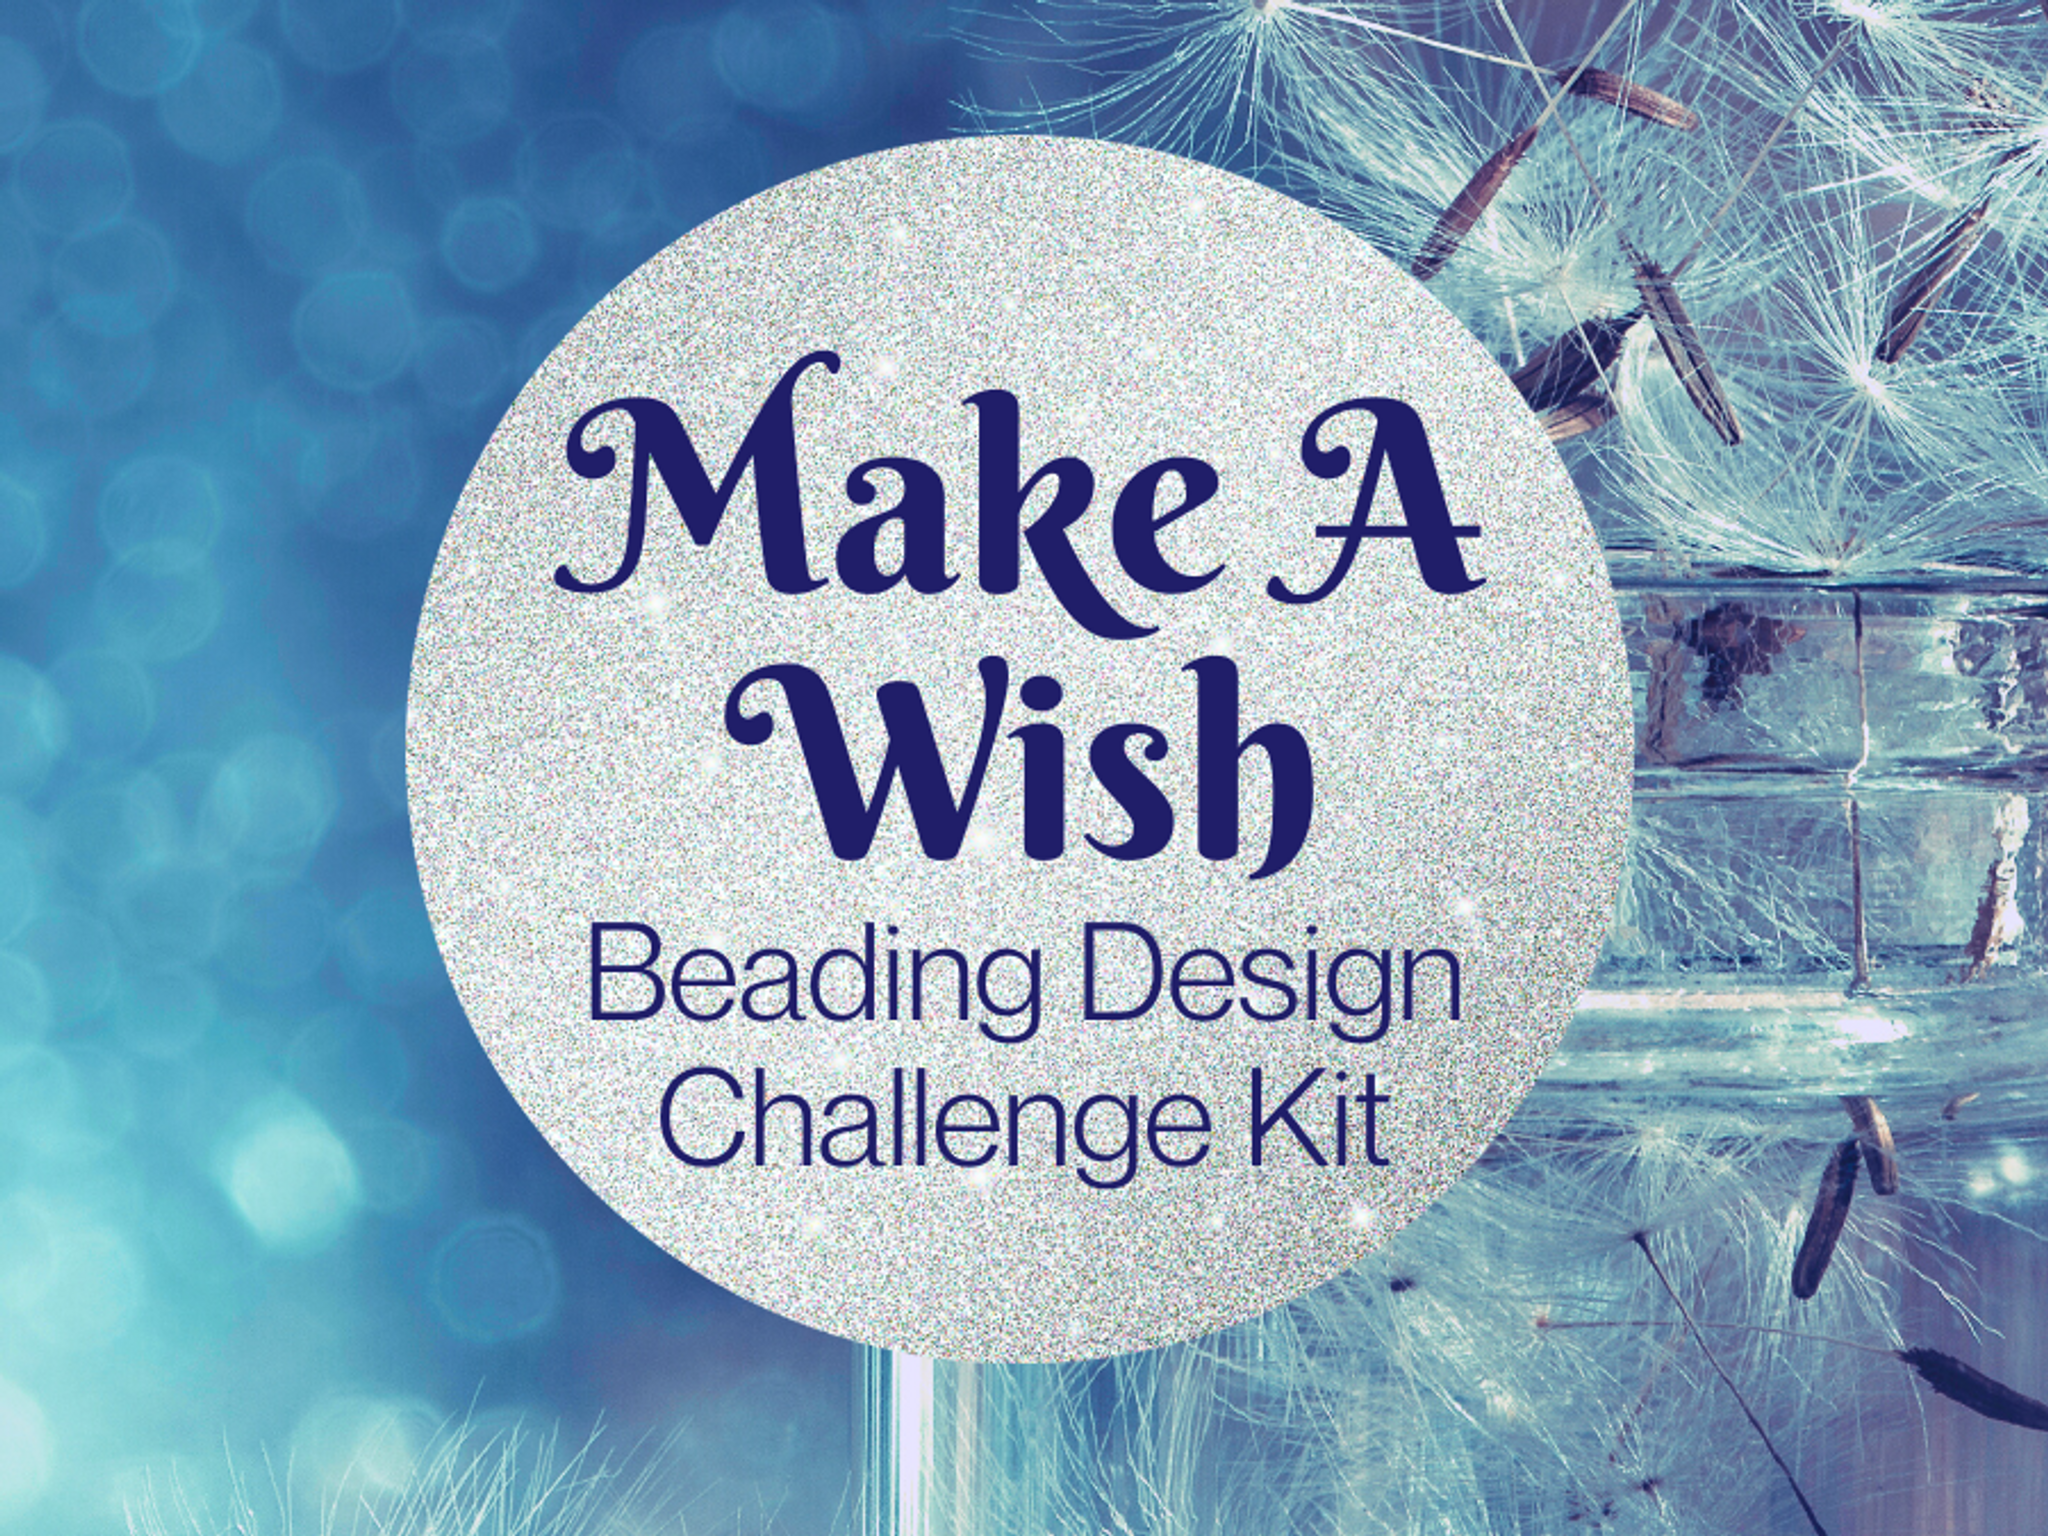 Shop our jewelry making design kits!